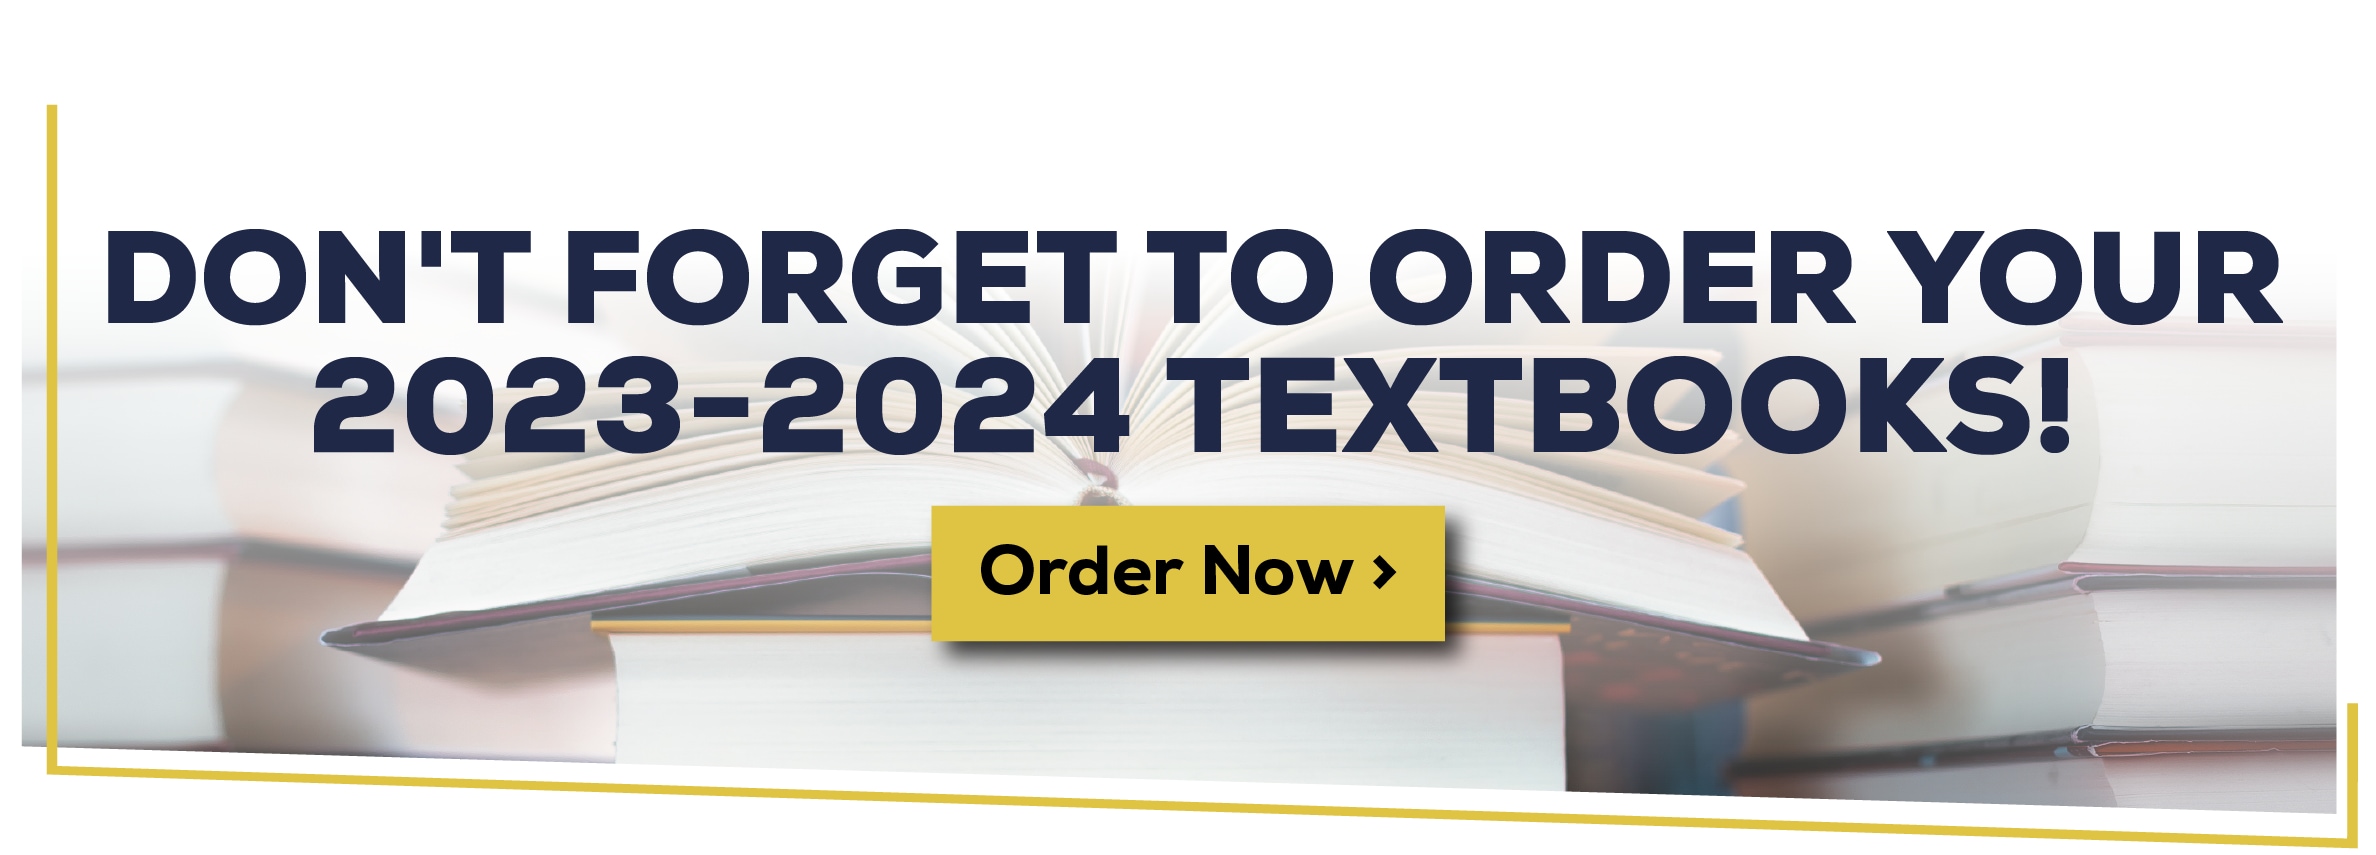 Don't forget to order your 2023-2024 textbooks!  Order Now!